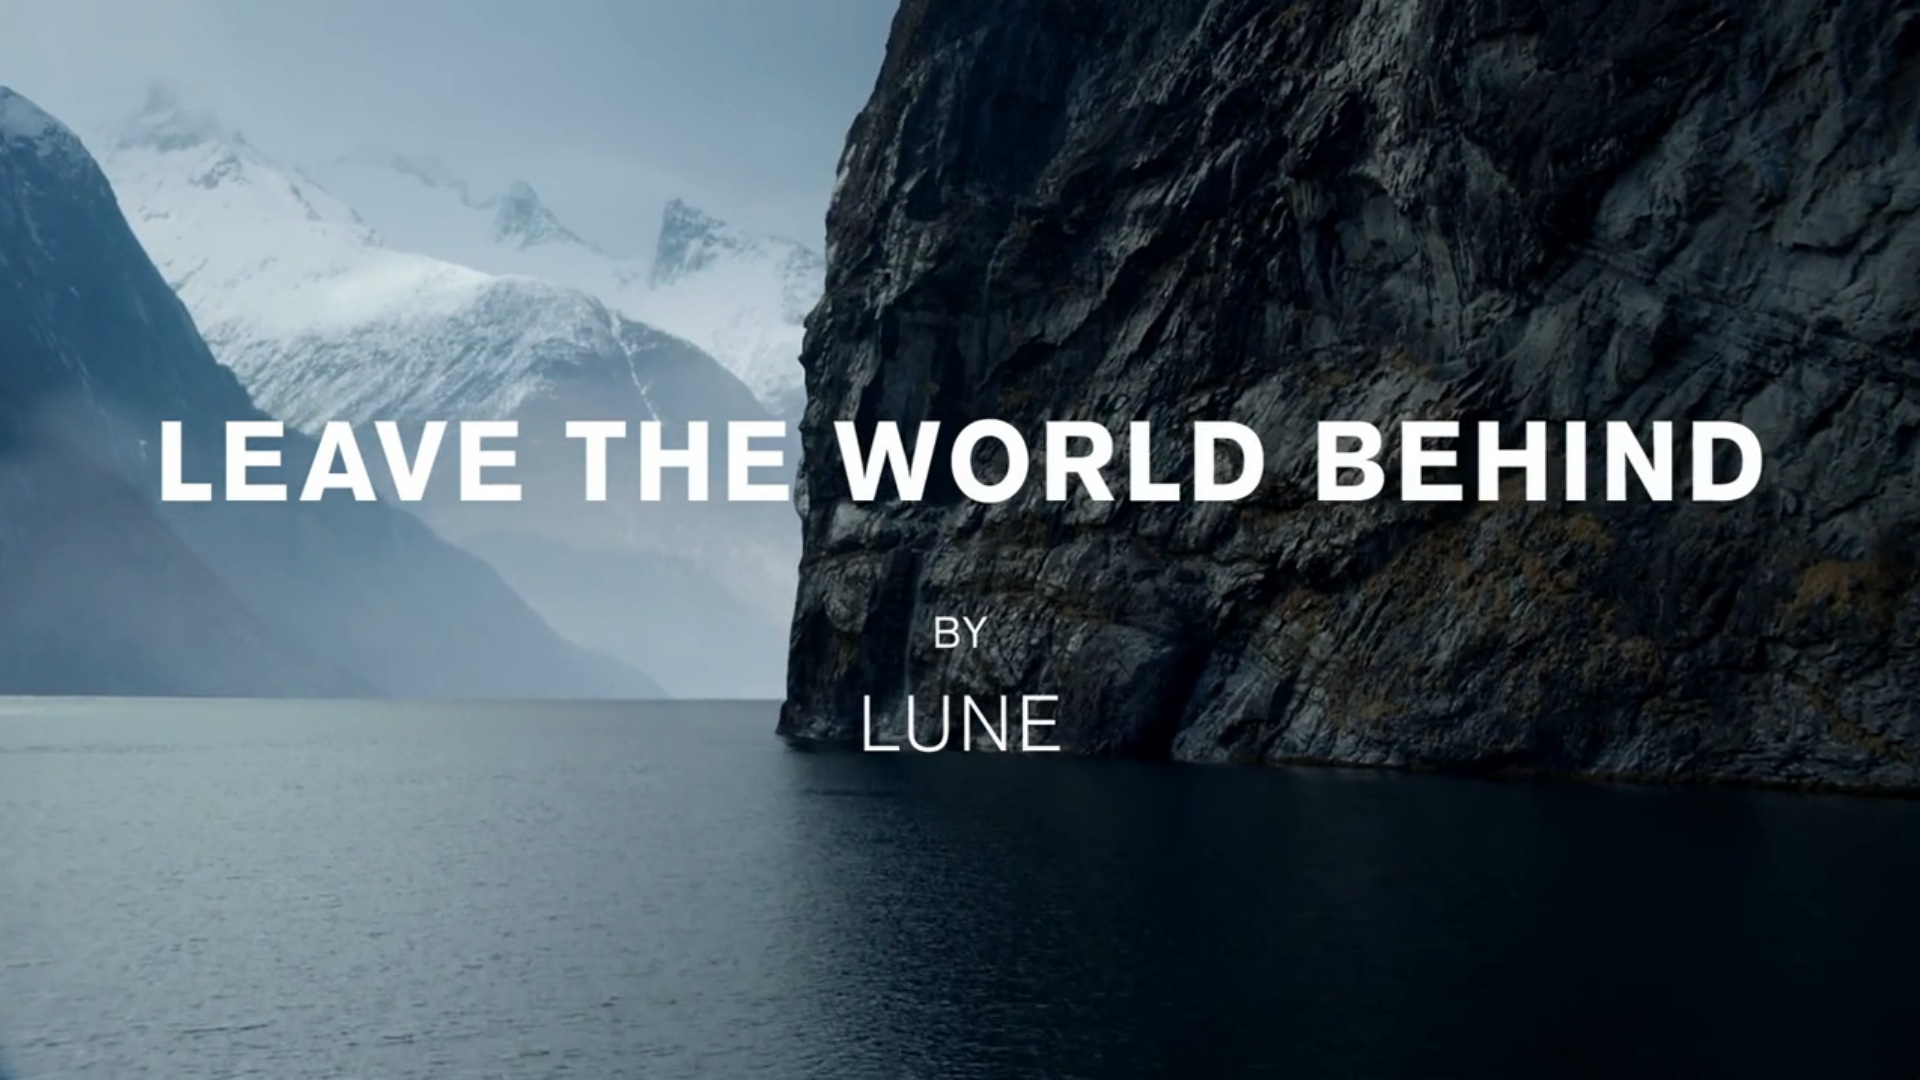 Lune - Leave the World Behind12